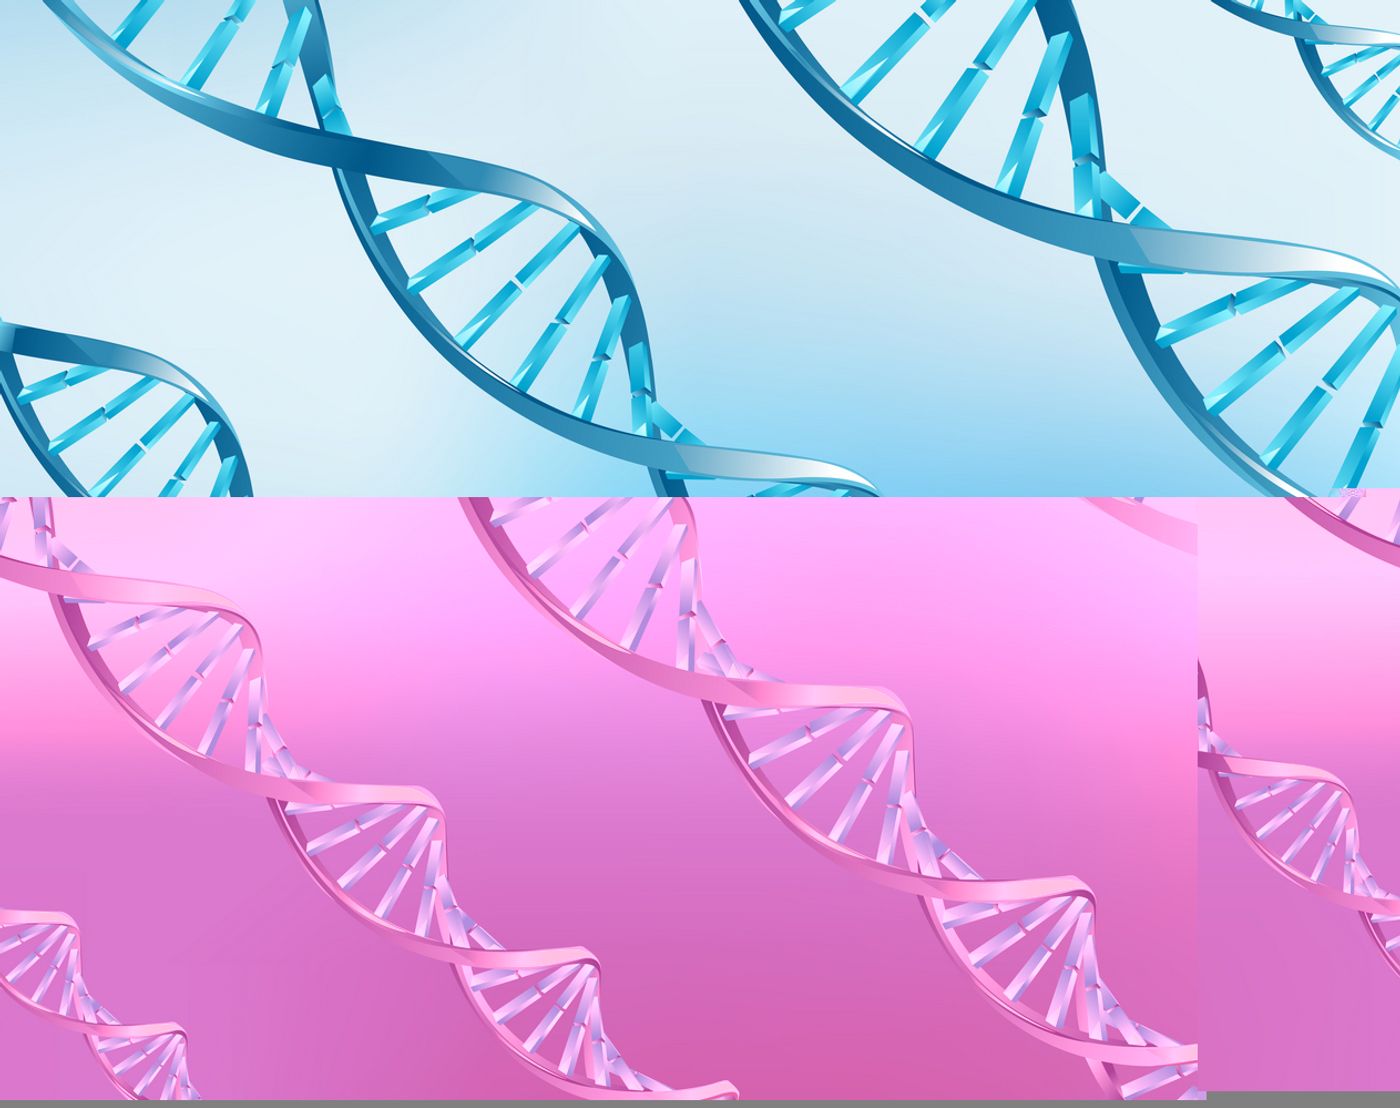 Center tackles genomic approach to critical care.